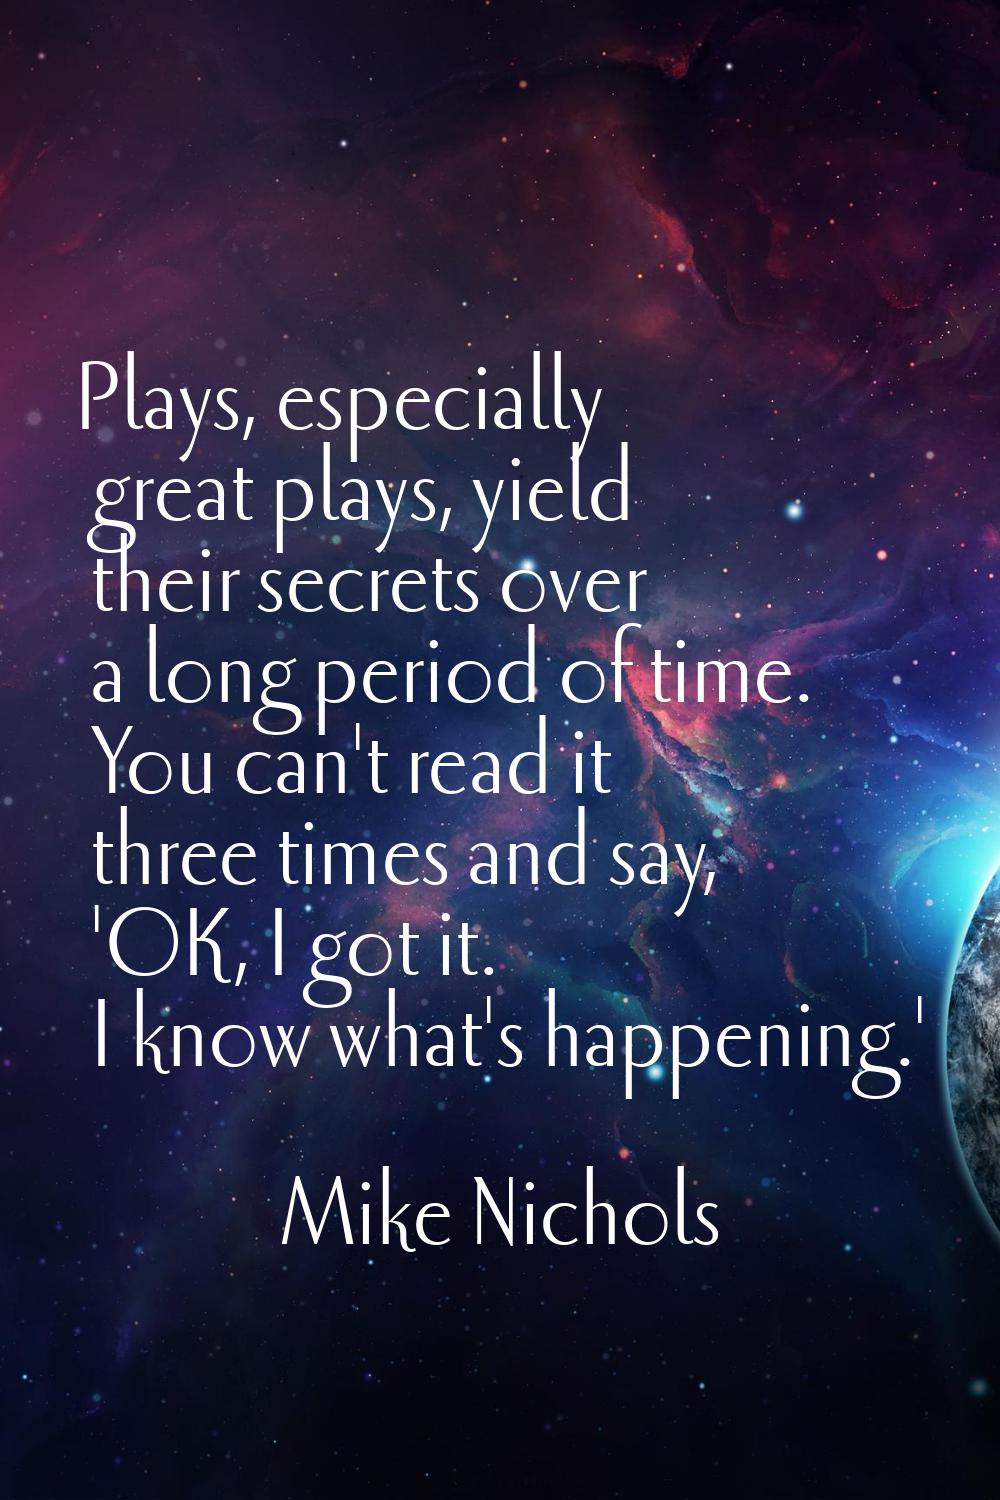 Plays, especially great plays, yield their secrets over a long period of time. You can't read it th